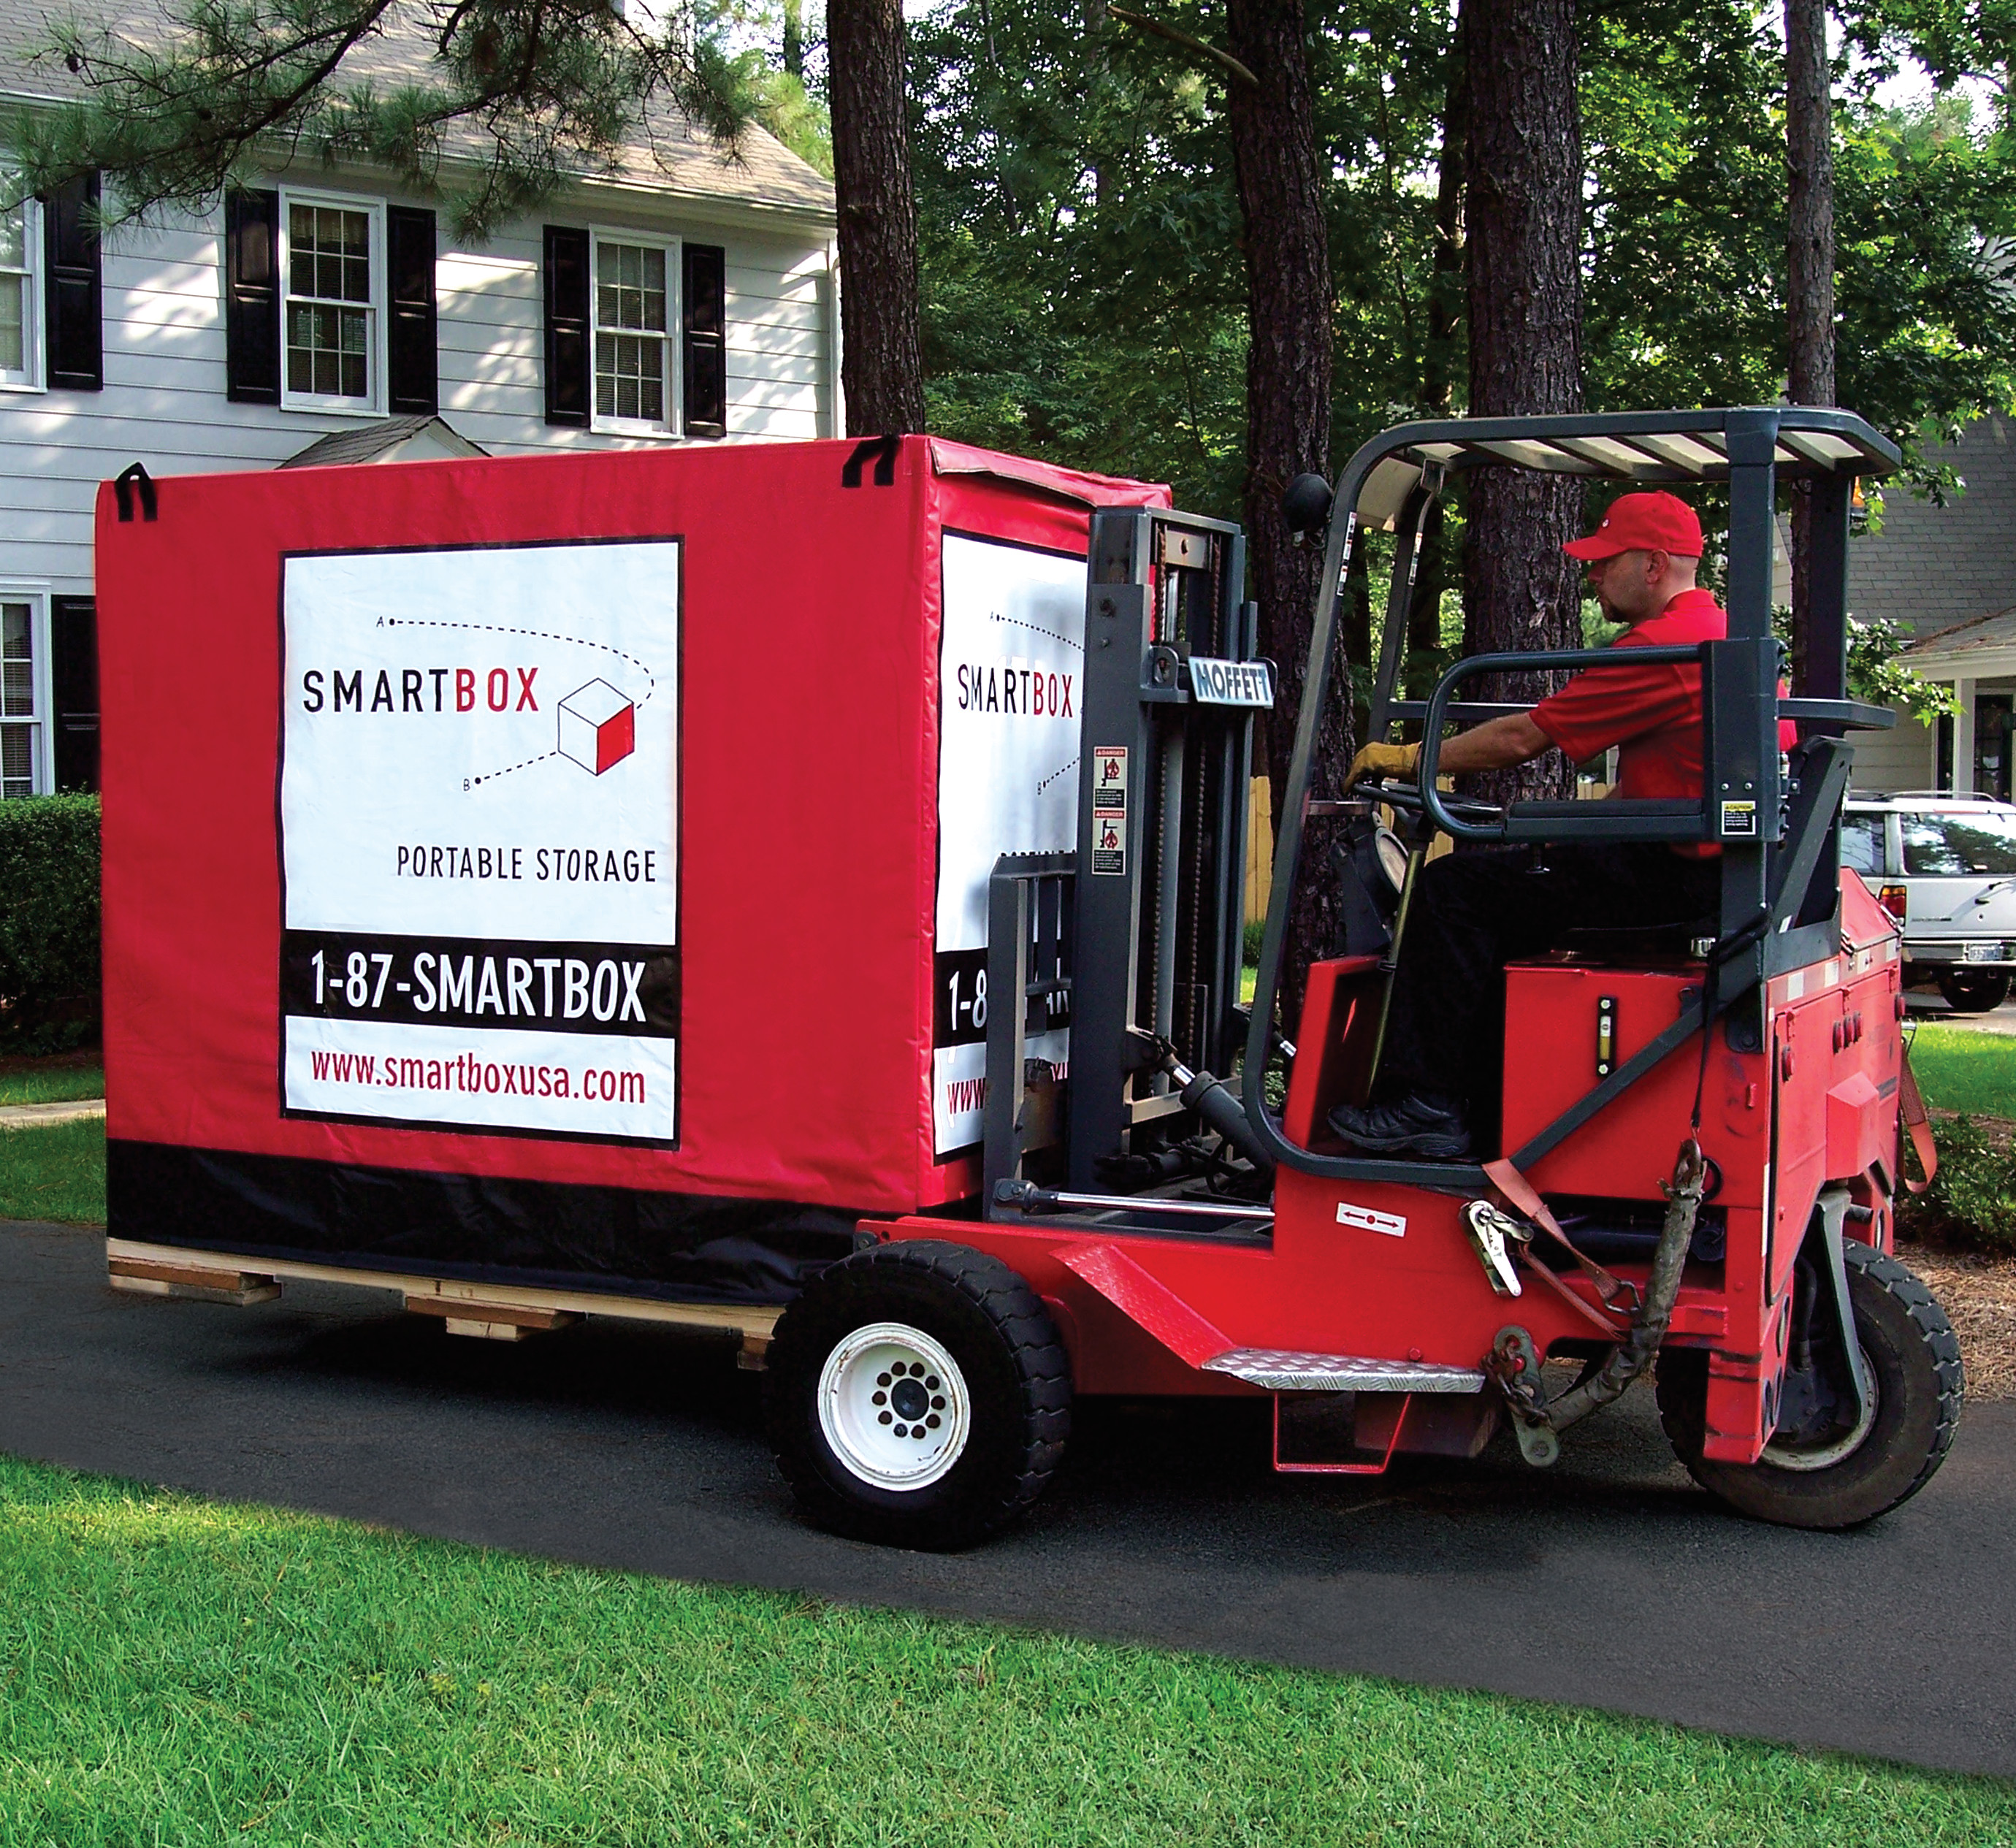 SMARTBOX is your portable moving and storage solution!